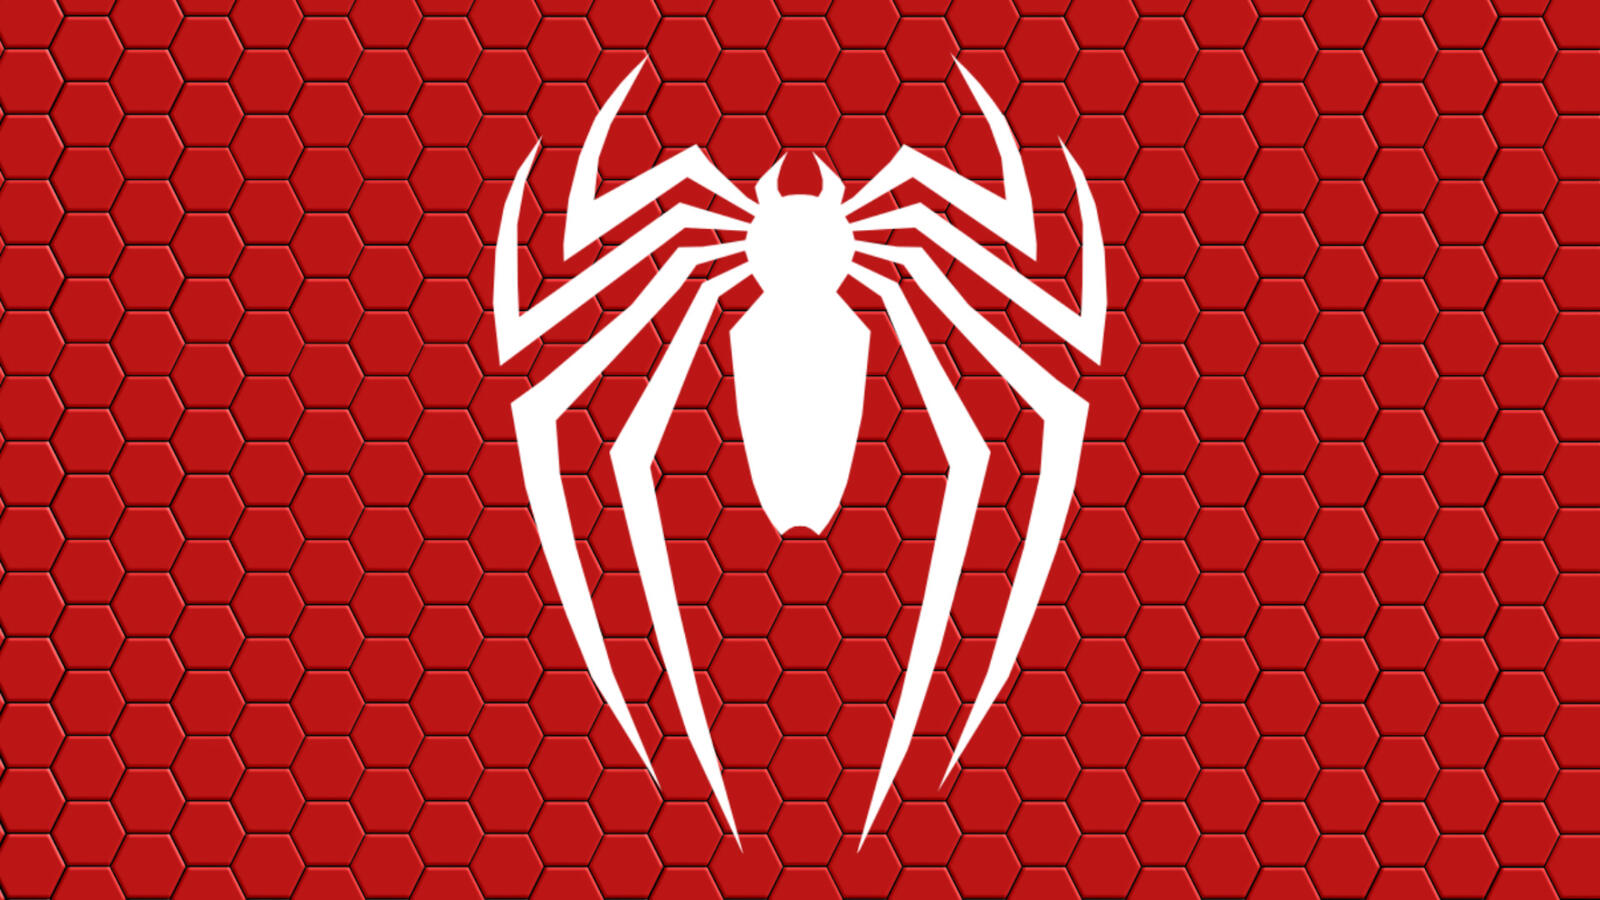 Wallpapers Spider-man the symbol red background on the desktop